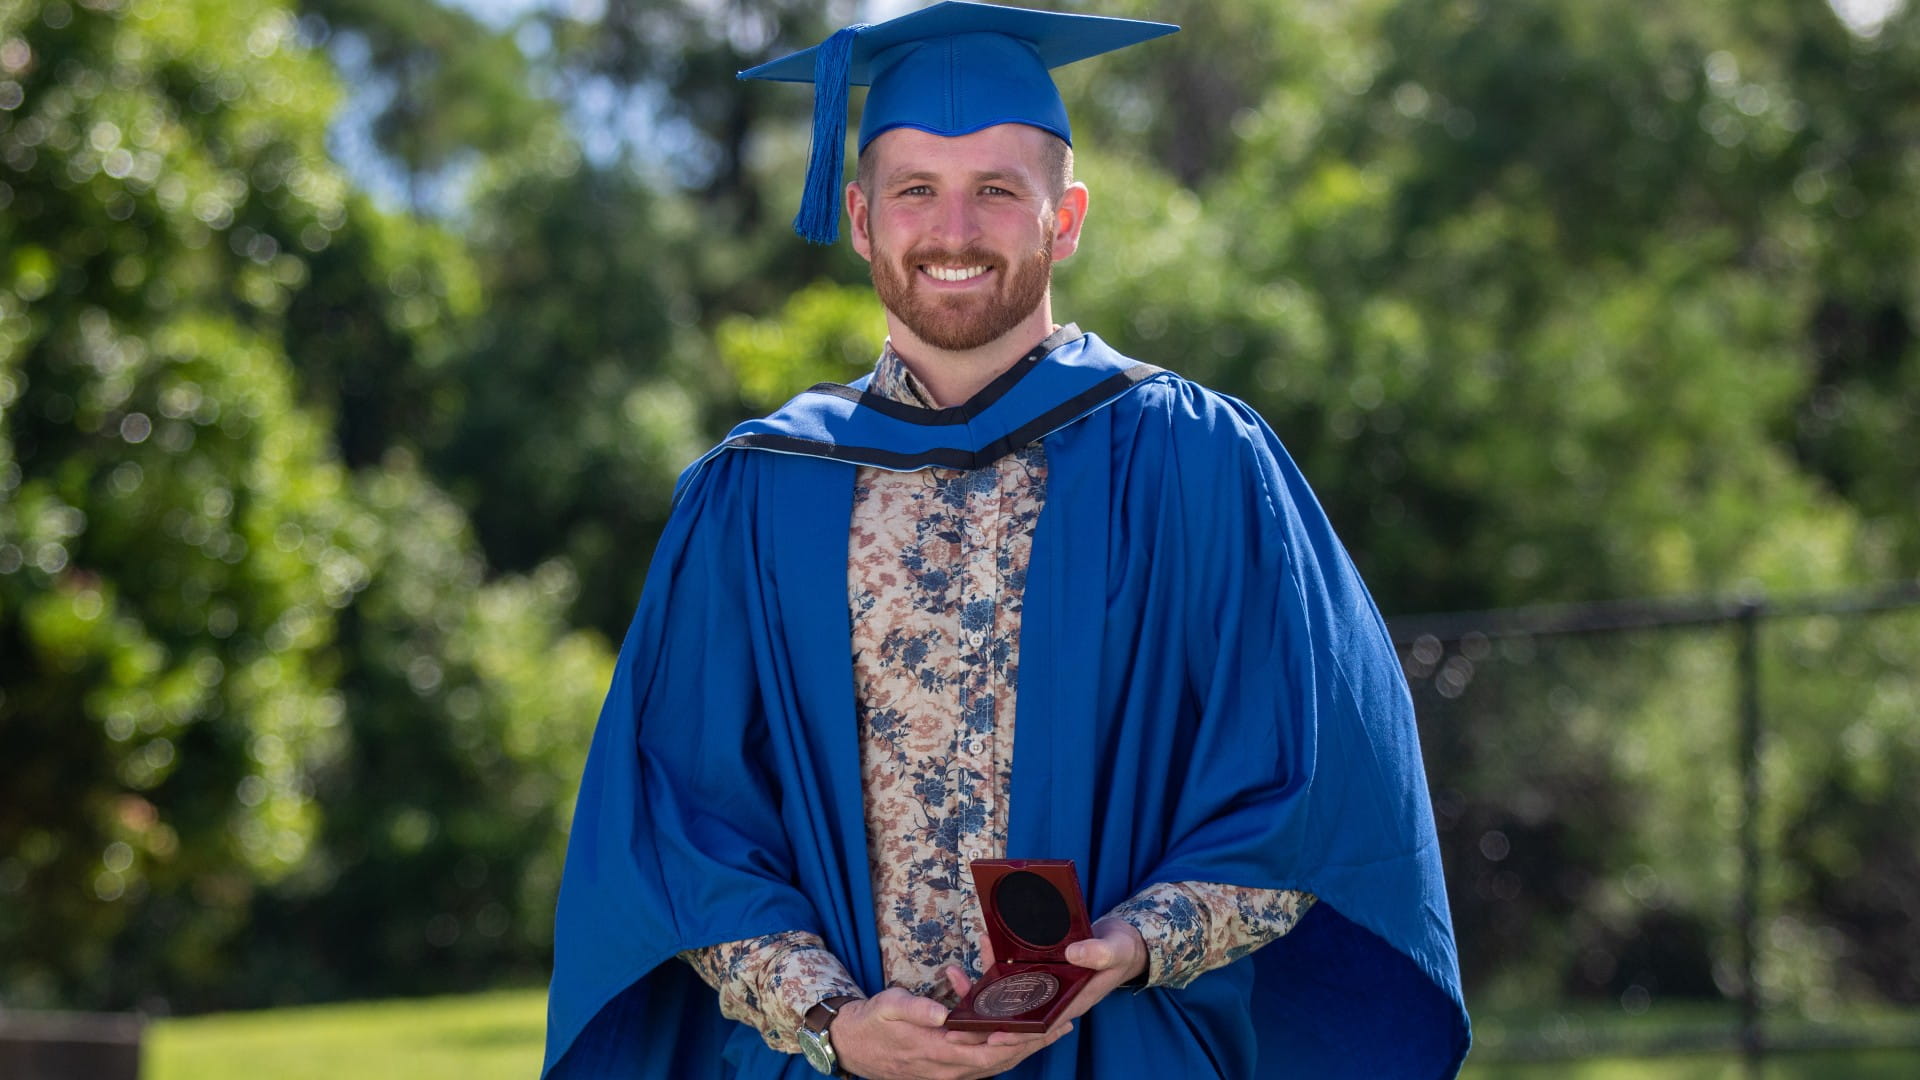 Rhys Smith, wearing a blue graduation cap and gown, holds the University medal and smiles. Photo: Andy Zakeli